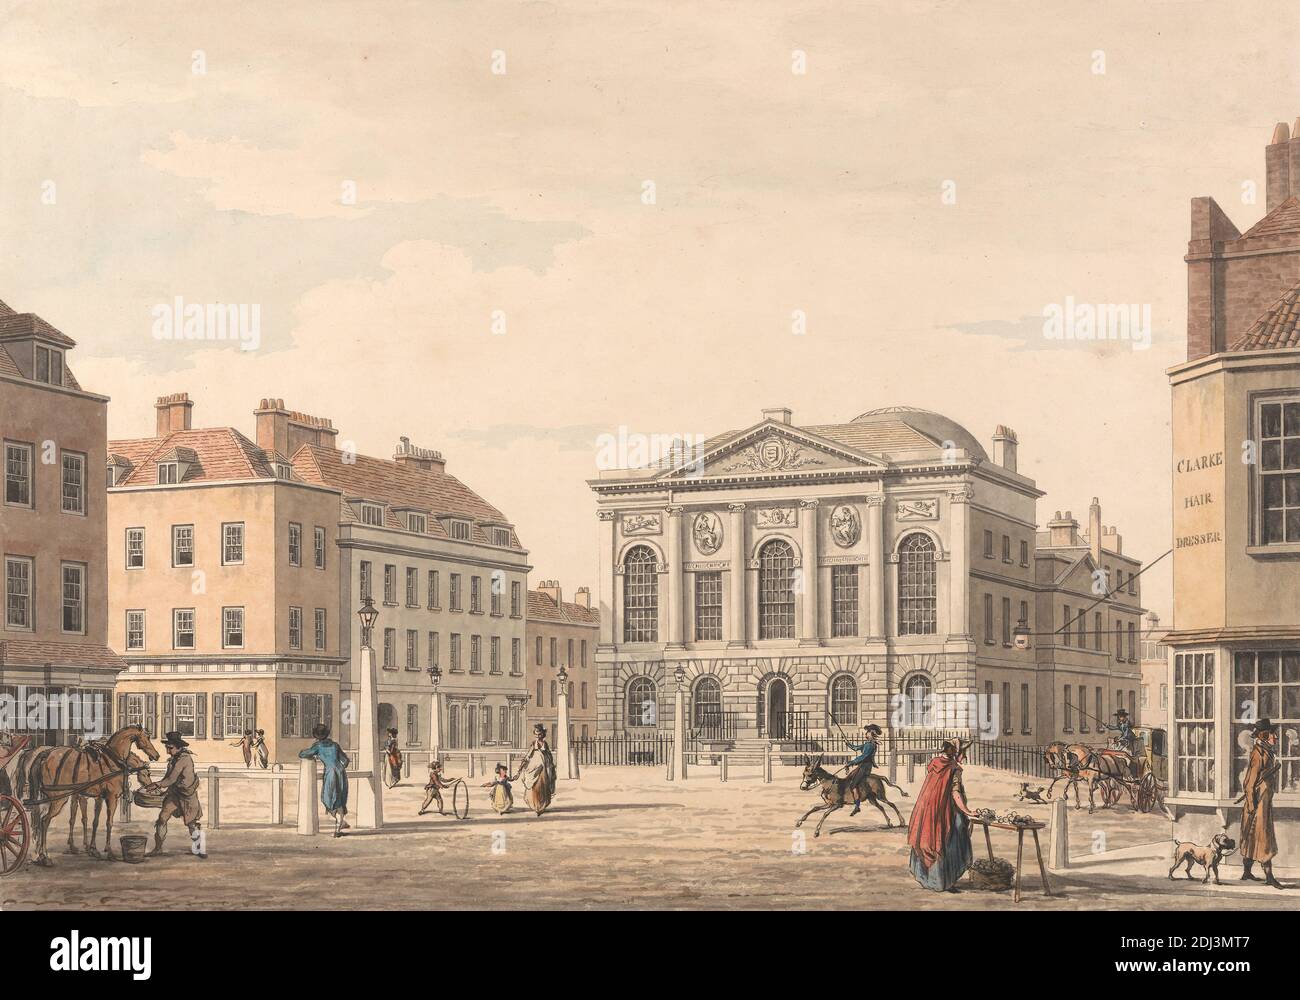 The Sessions House, Junction of Farringdon and Clerkenwell Roads, Thomas Malton the Younger, 1748–1804, British, undated, Watercolor over etched outline on medium, slightly textured, cream, wove paper, mounted on, thick, slightly textured, beige, laid paper, Sheet: 8 3/8 x 11 15/16in. (21.3 x 30.3cm), architectural subject Stock Photo